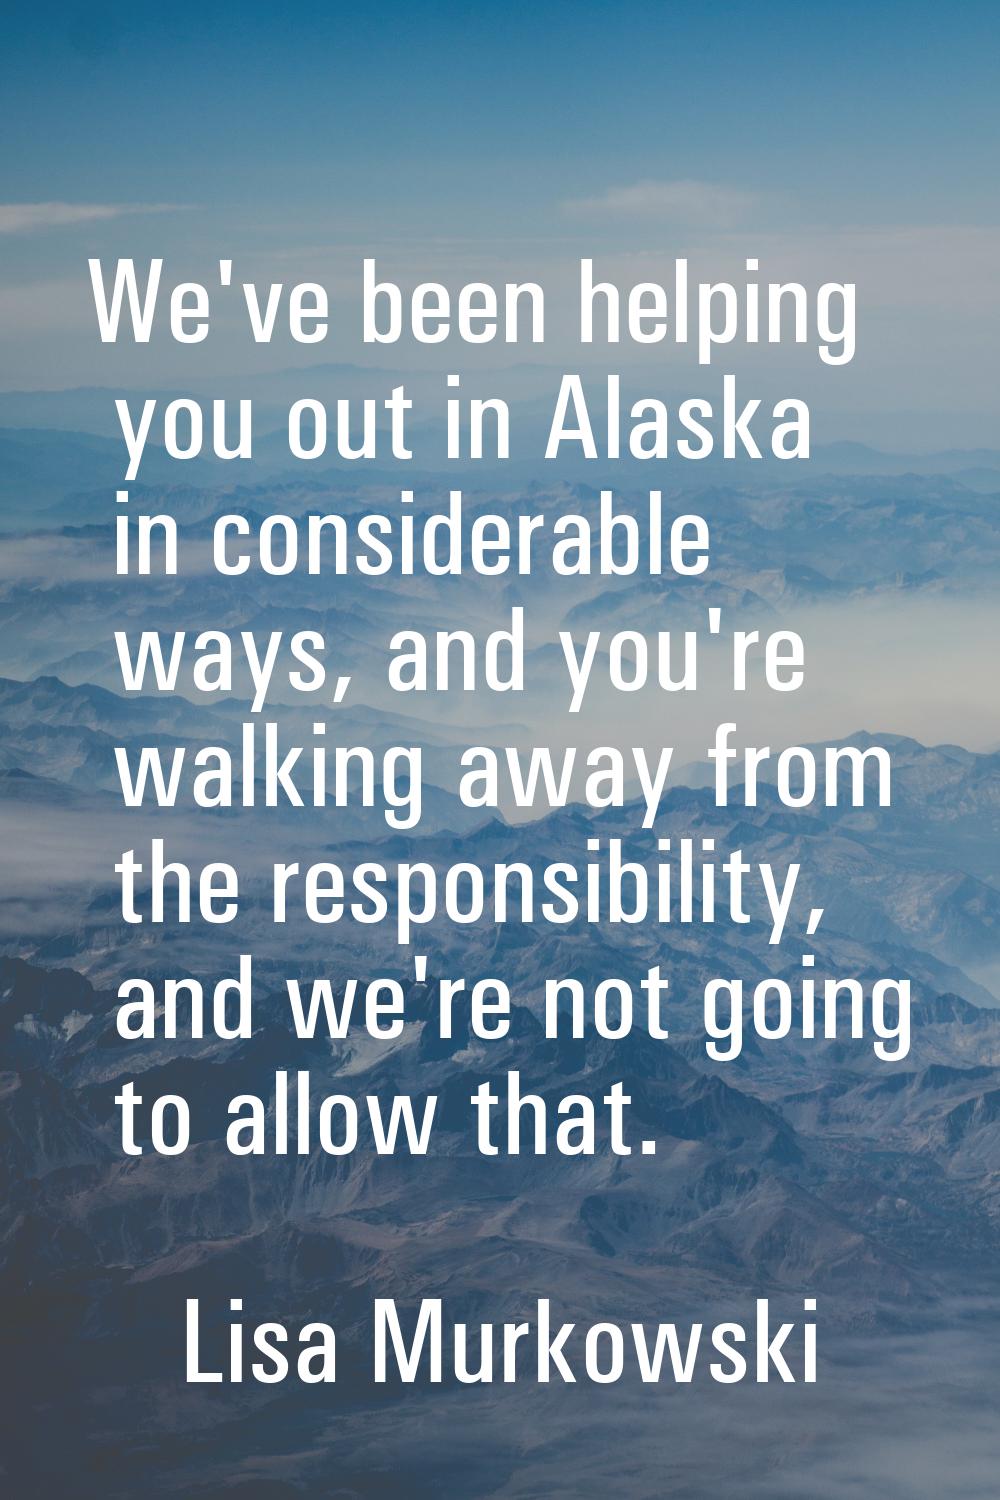 We've been helping you out in Alaska in considerable ways, and you're walking away from the respons